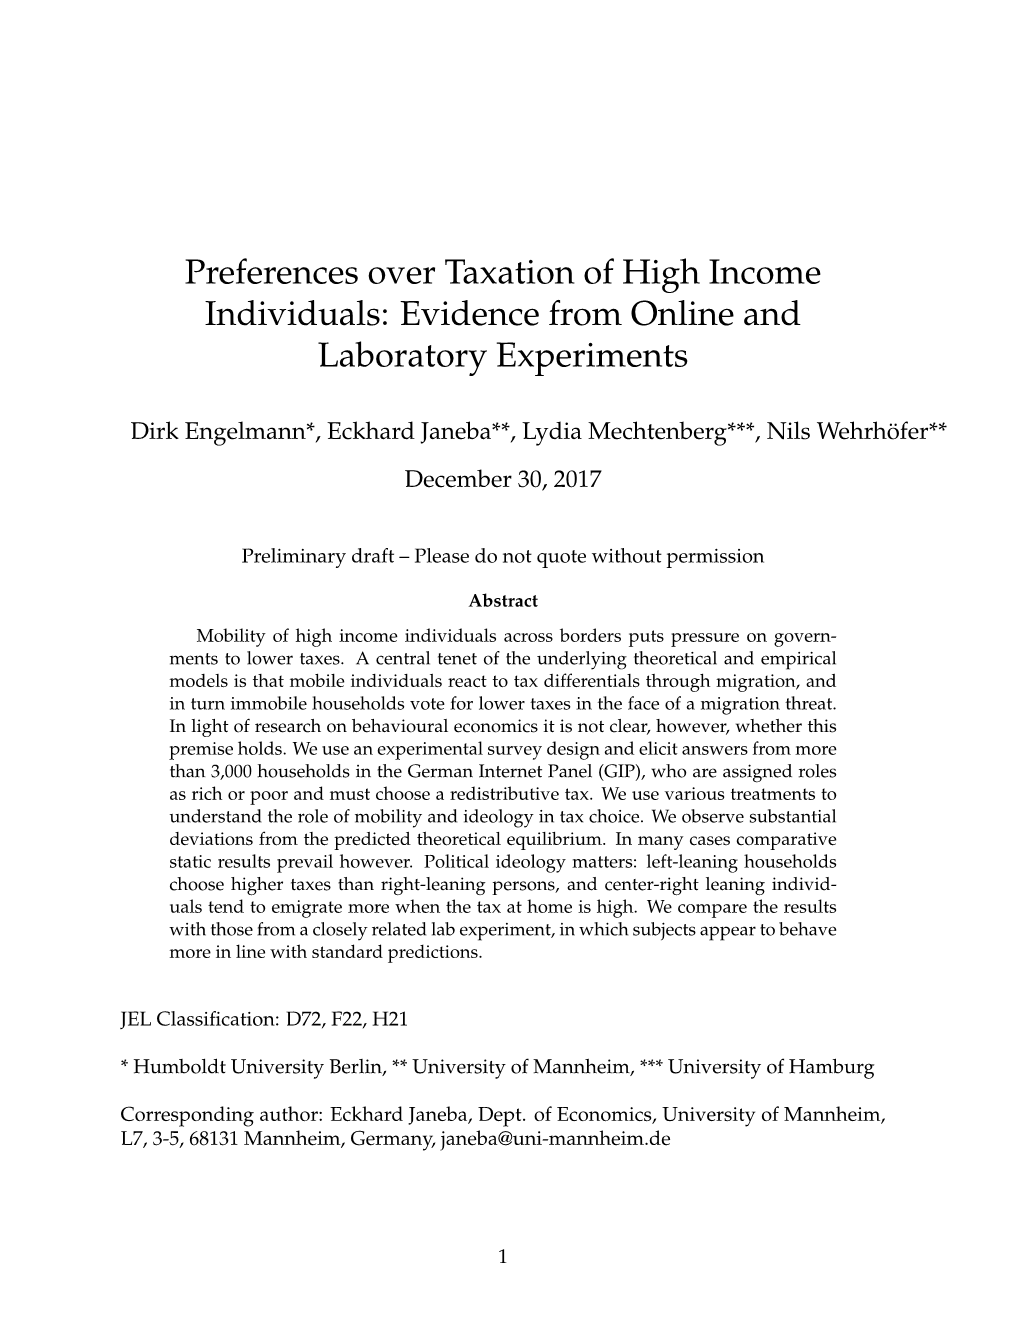 Preferences Over Taxation of High Income Individuals: Evidence from Online and Laboratory Experiments